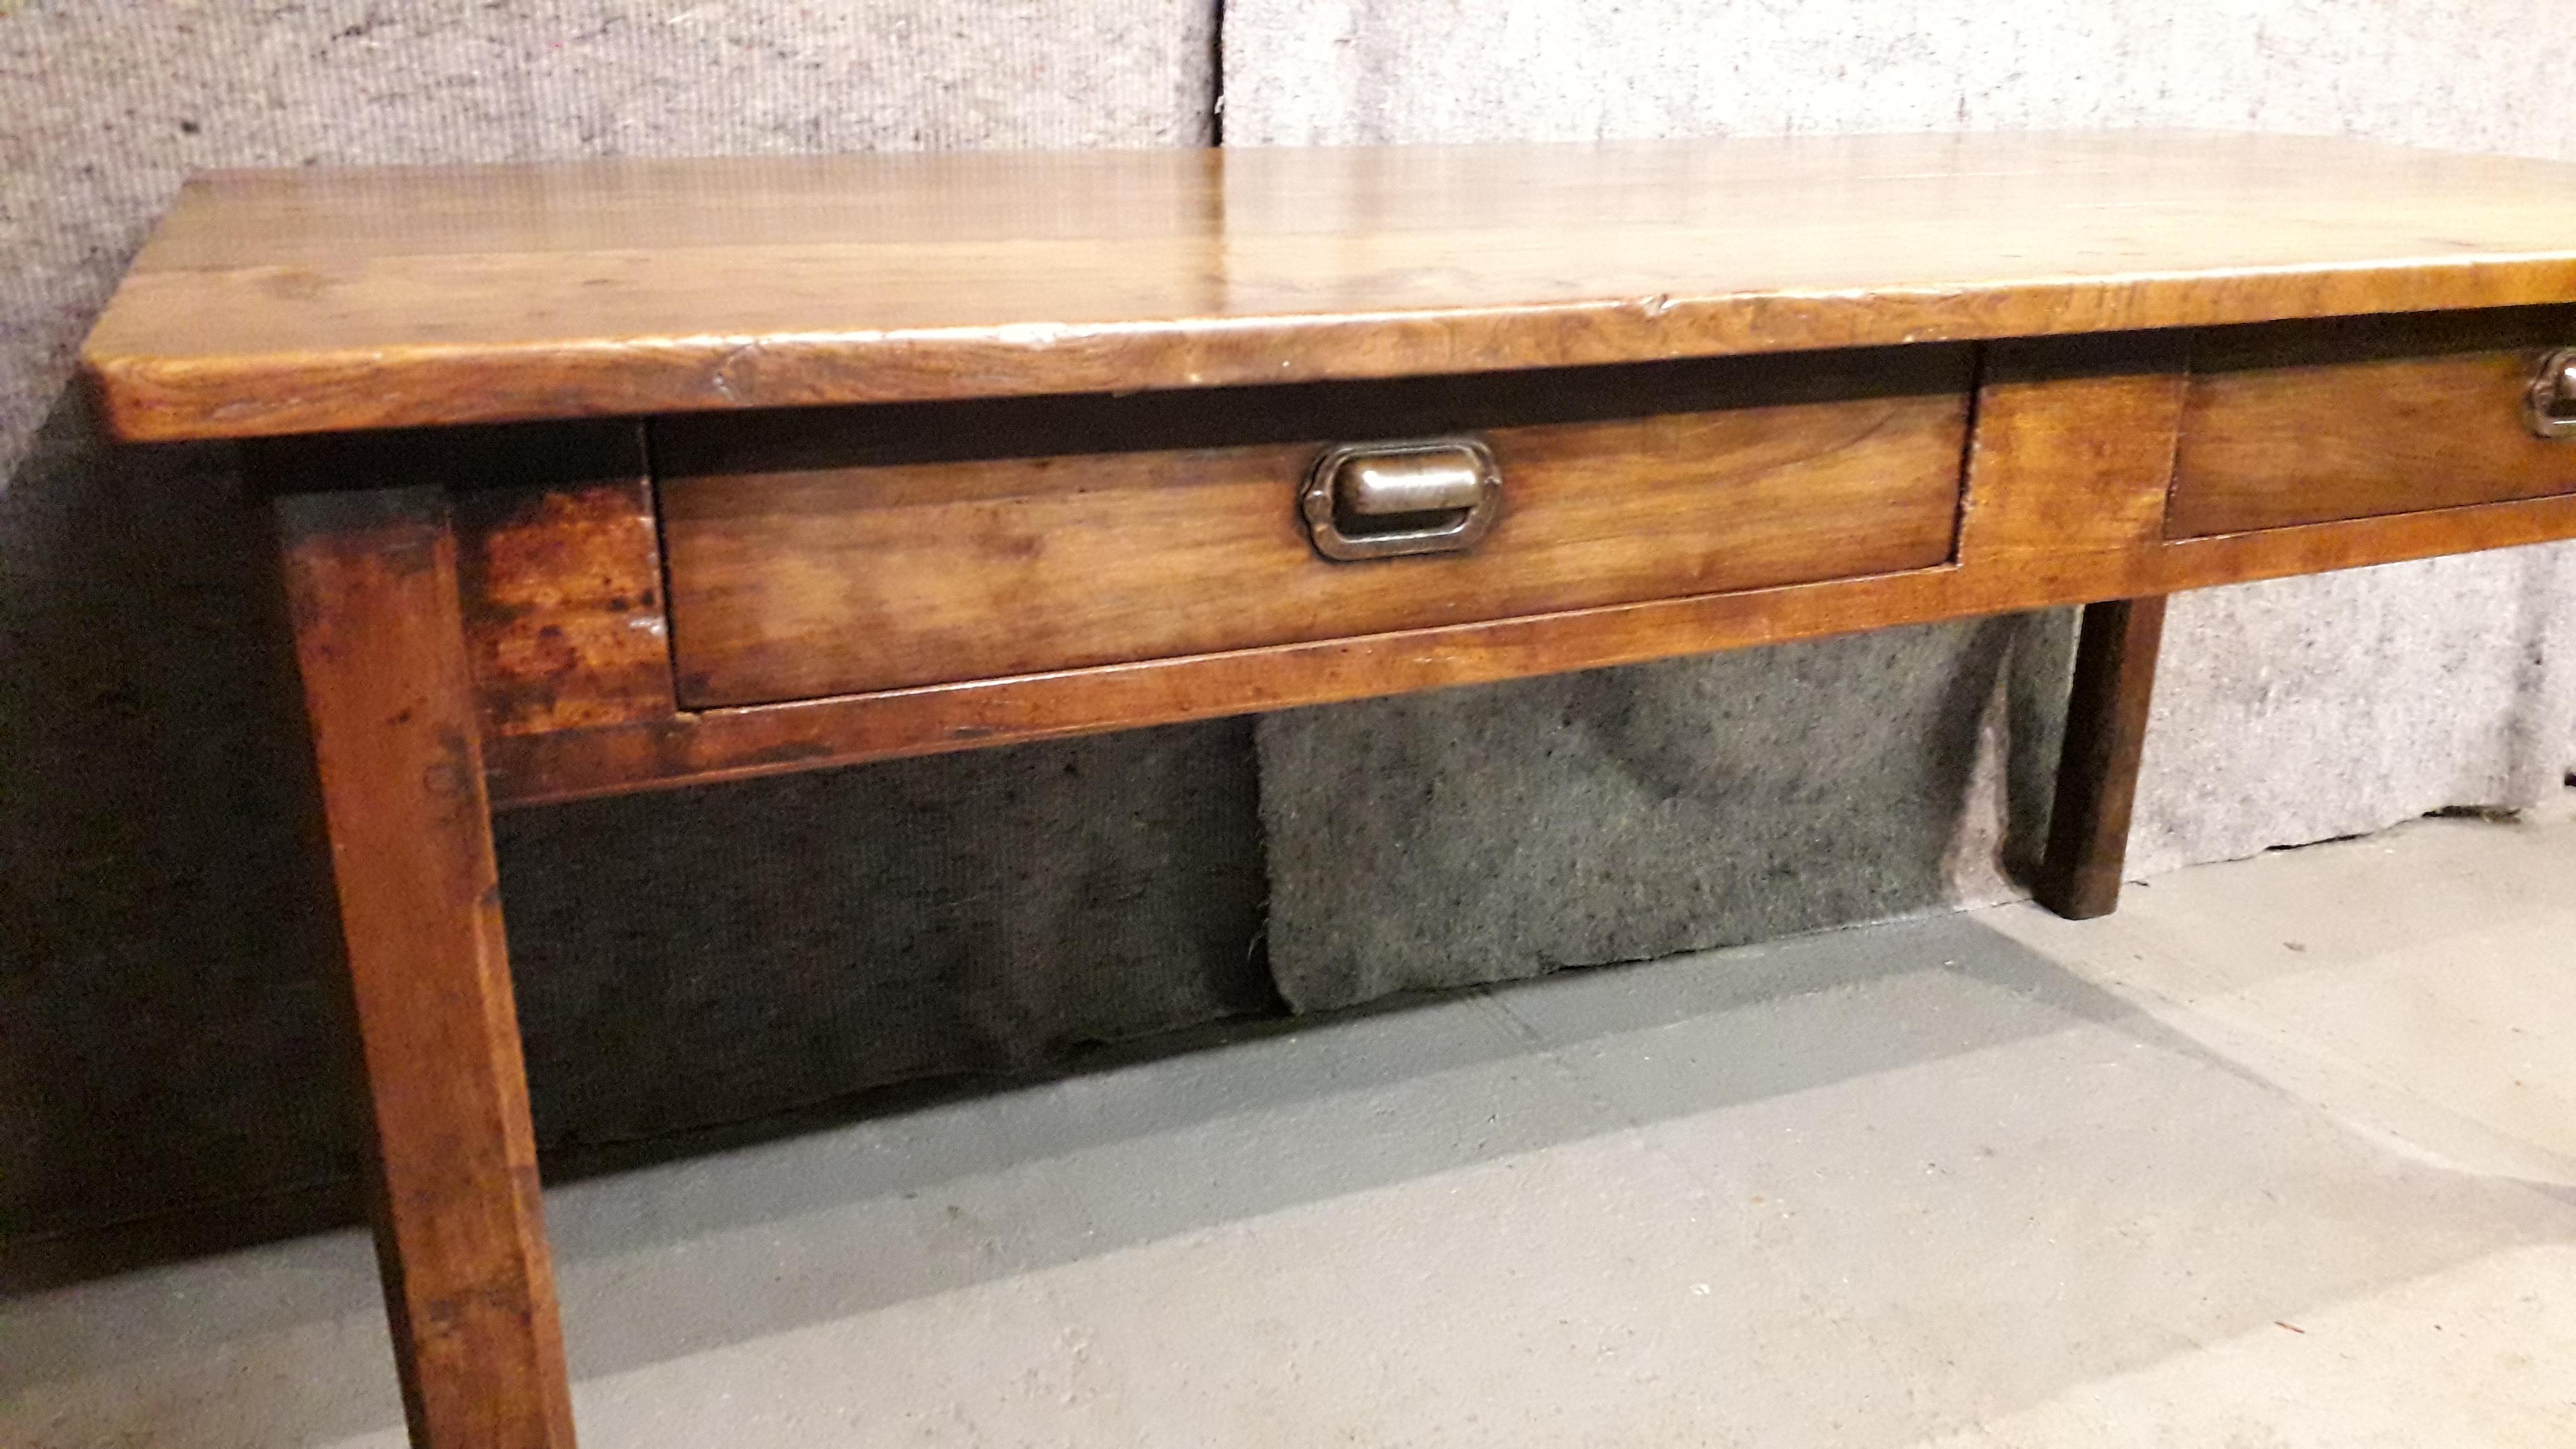 A fabulous refectory table, the base made in cherry with a beautiful elm top, the side drawers internals have been restored and painted fresh white to finish.
Great cutlery and mat storage with excellent iron pull handles, the square chambered legs